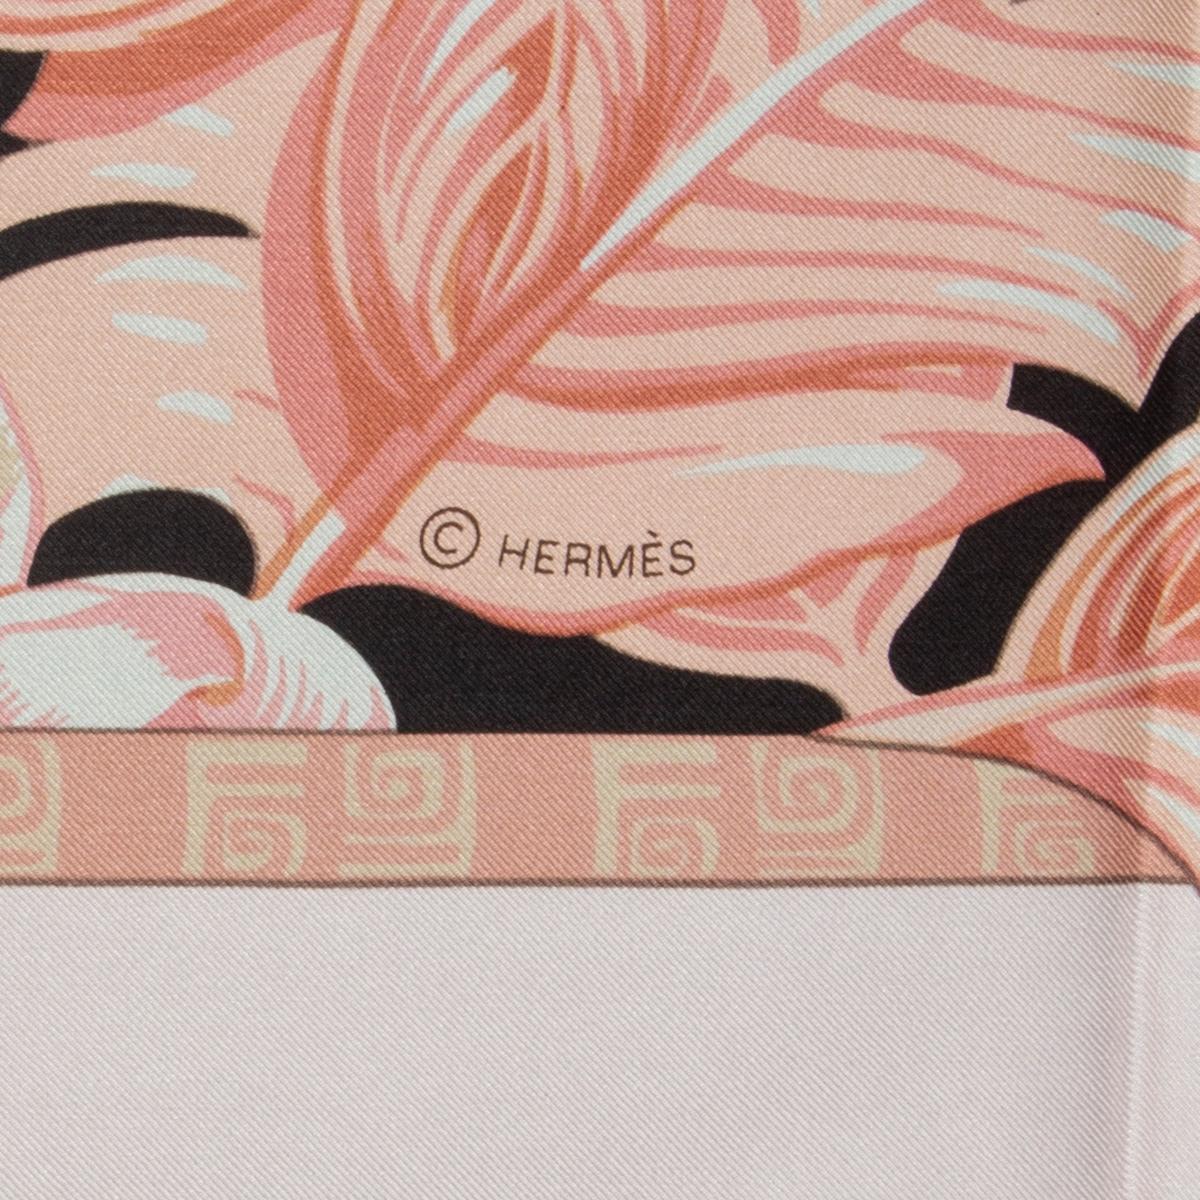 Women's or Men's auth HERMES pink ALOHA 140 silk Shawl Scarf